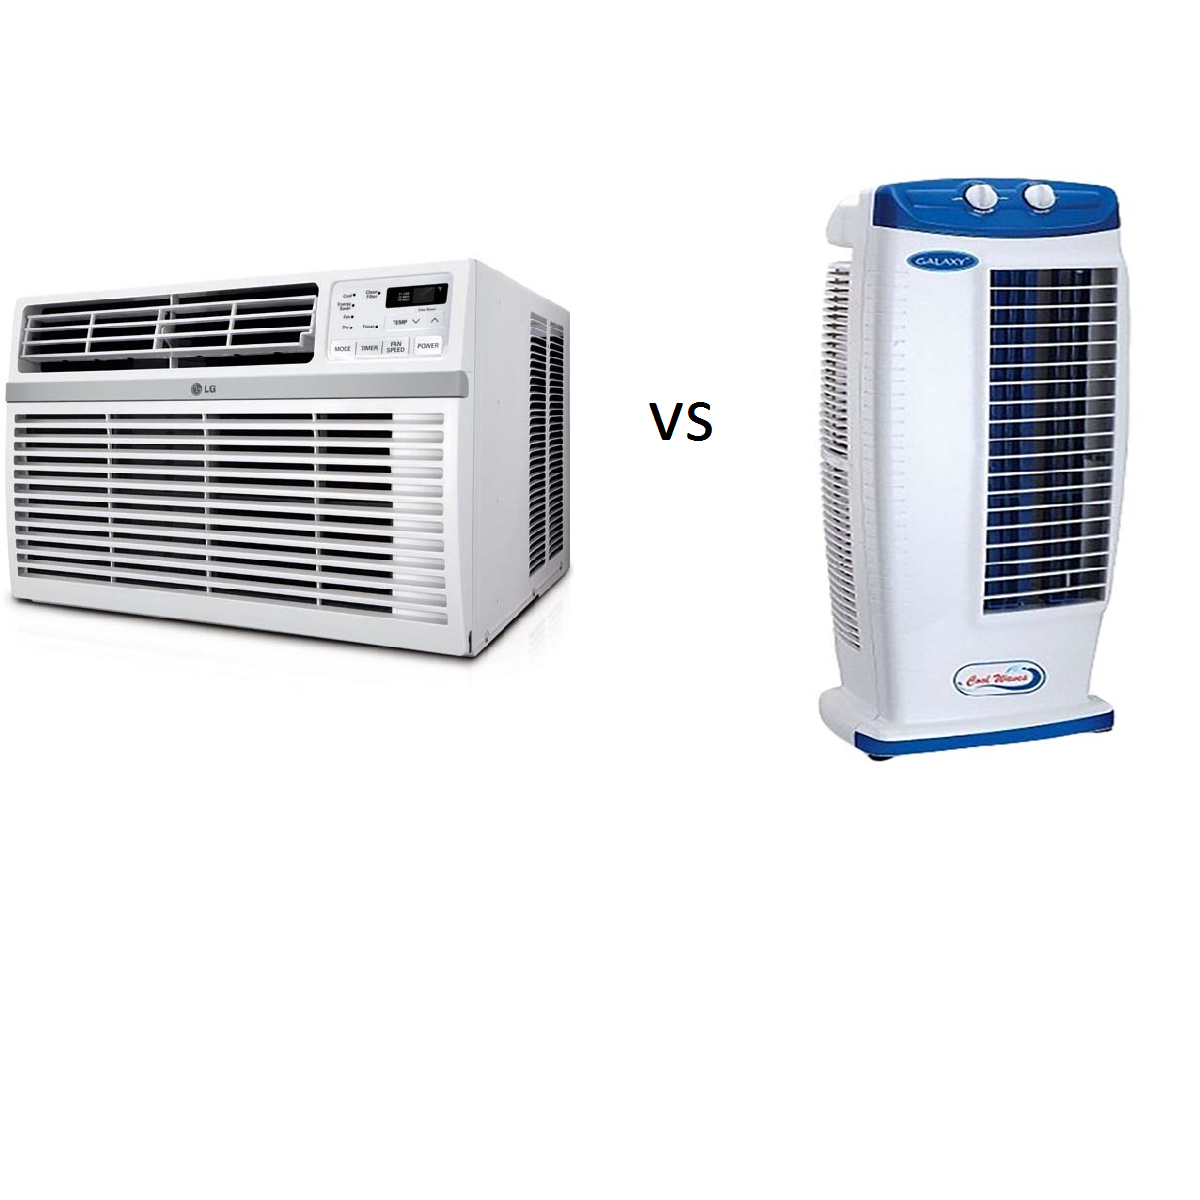 Window Ac Units Vs Tower Fans Which One To Choose within dimensions 1200 X 1200